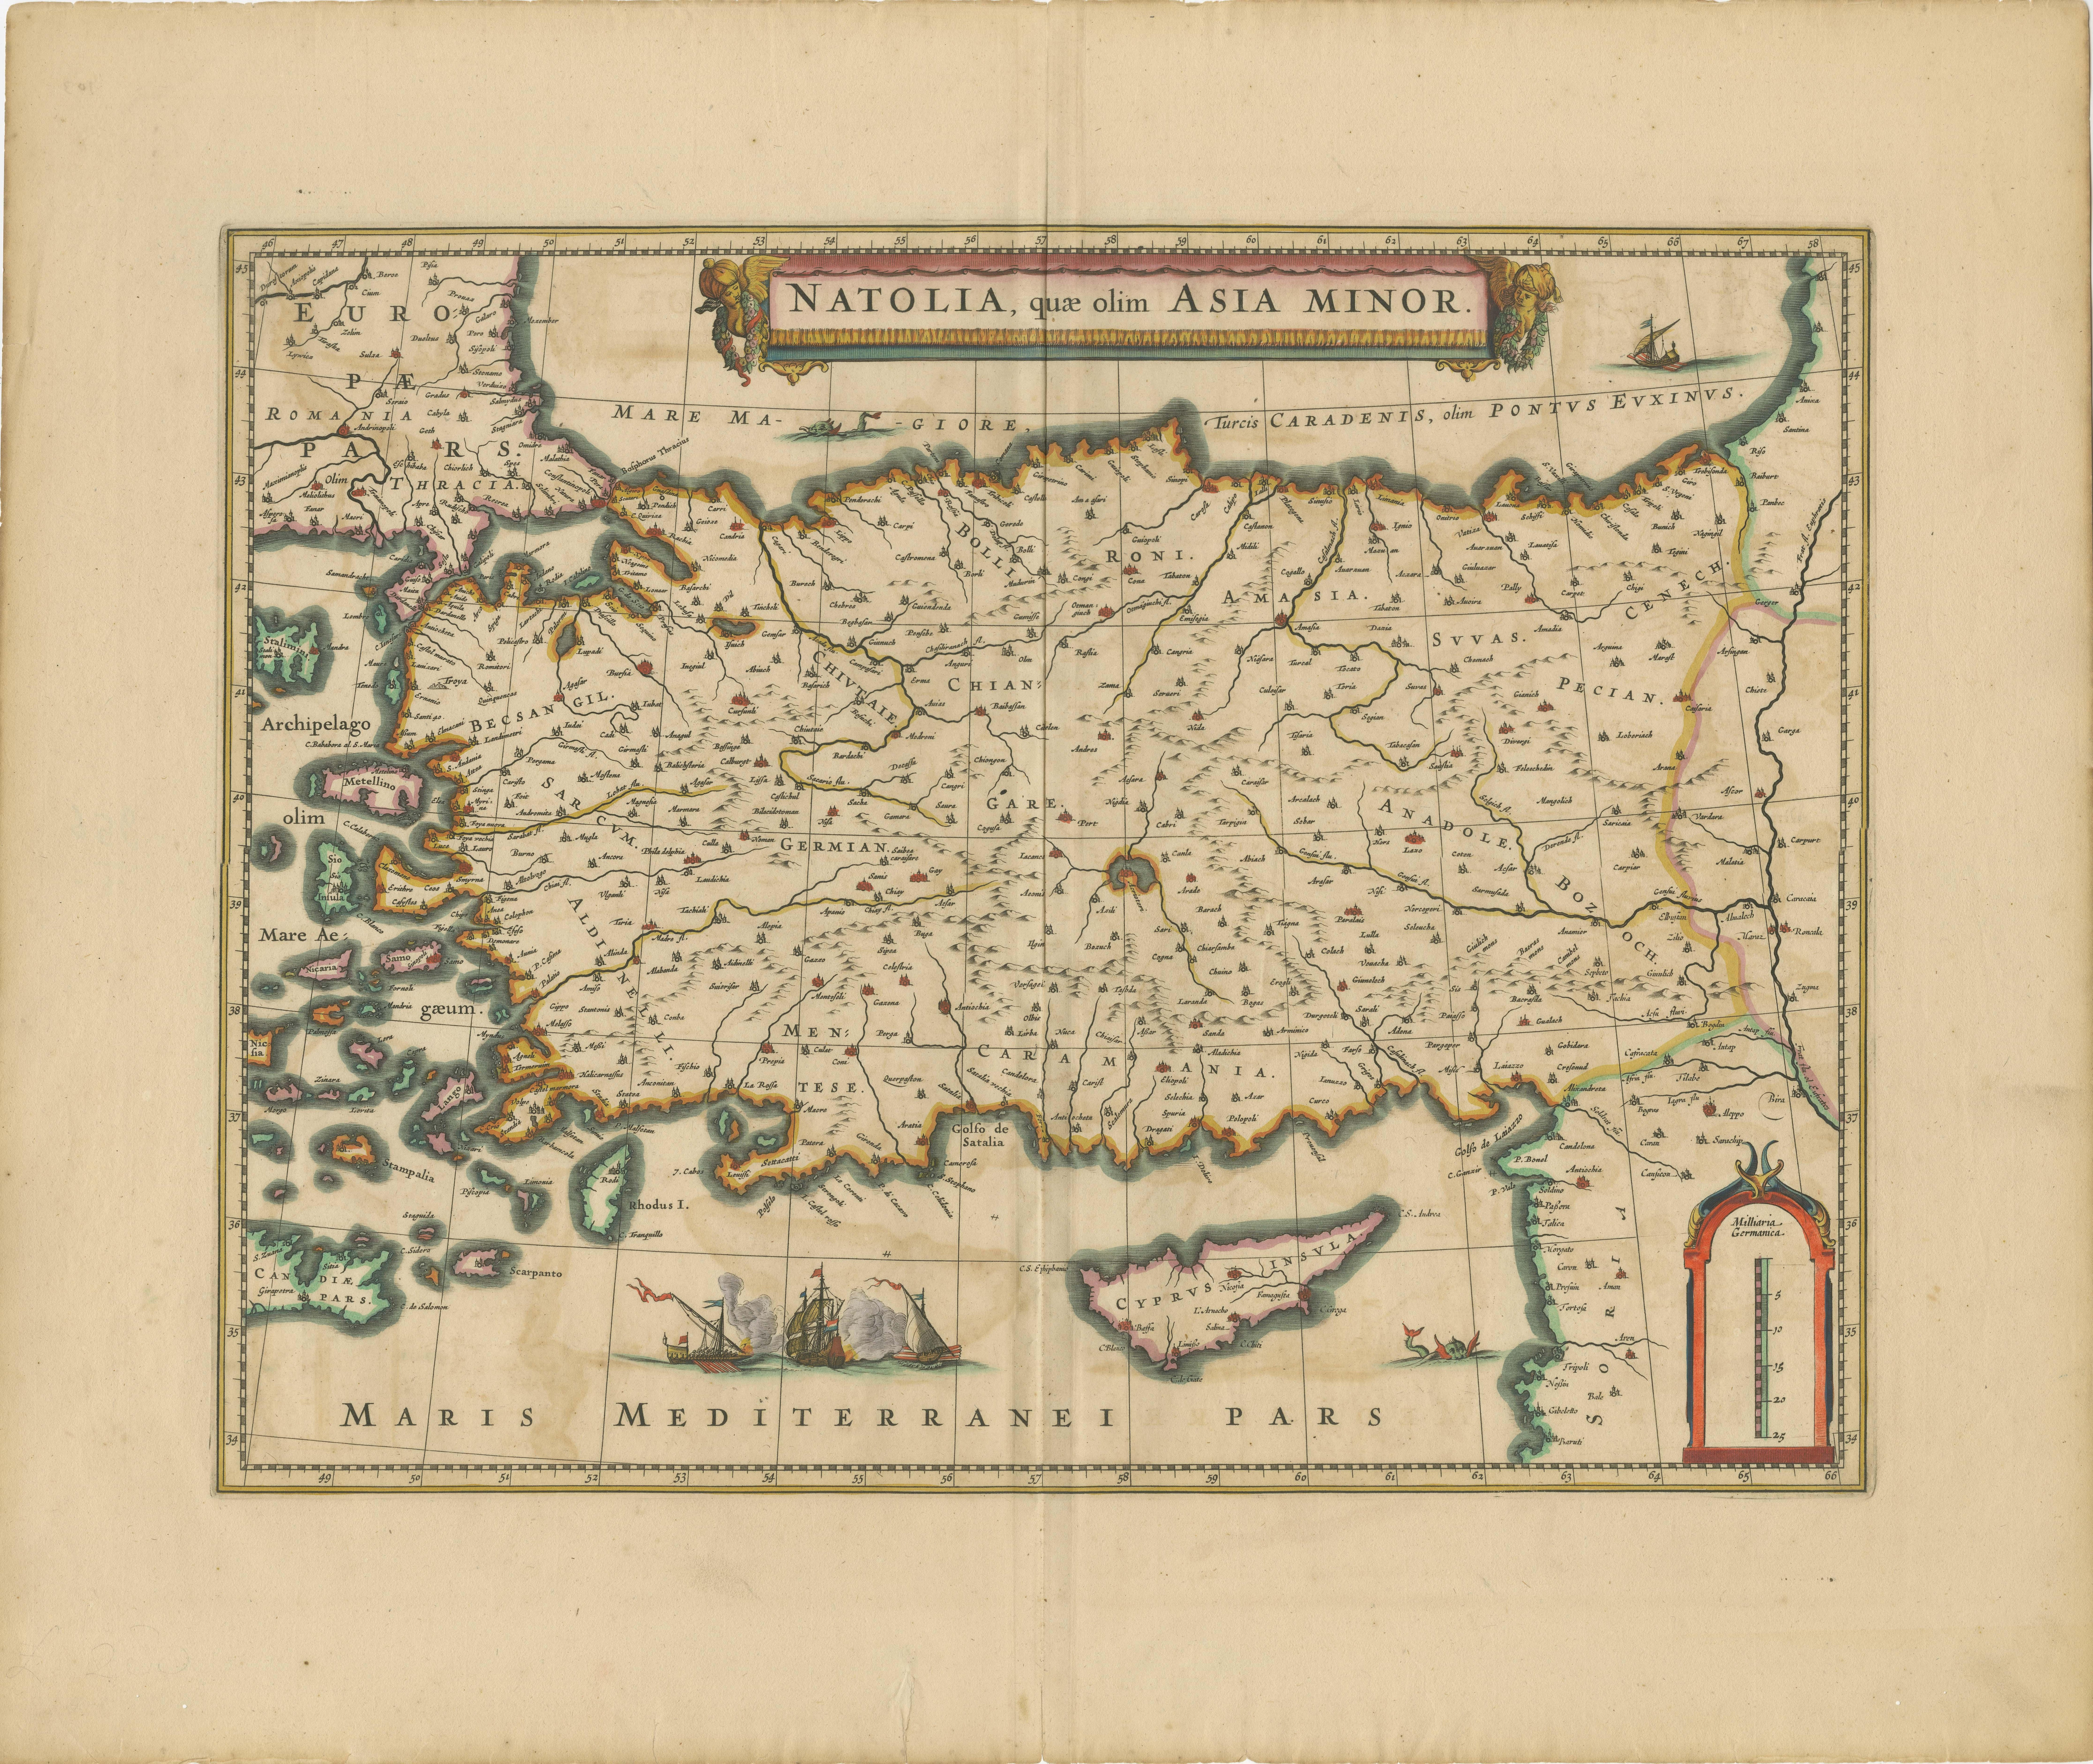 Antique map titled 'Natolia, quae olim Asia Minor'. Decorative map of Asia Minor, showing Turkey, Cyprus and the Islands in the Aegean. This attractive map shows all of Turkey, Cyprus and the Aegean Islands to a relatively high degree of accuracy.